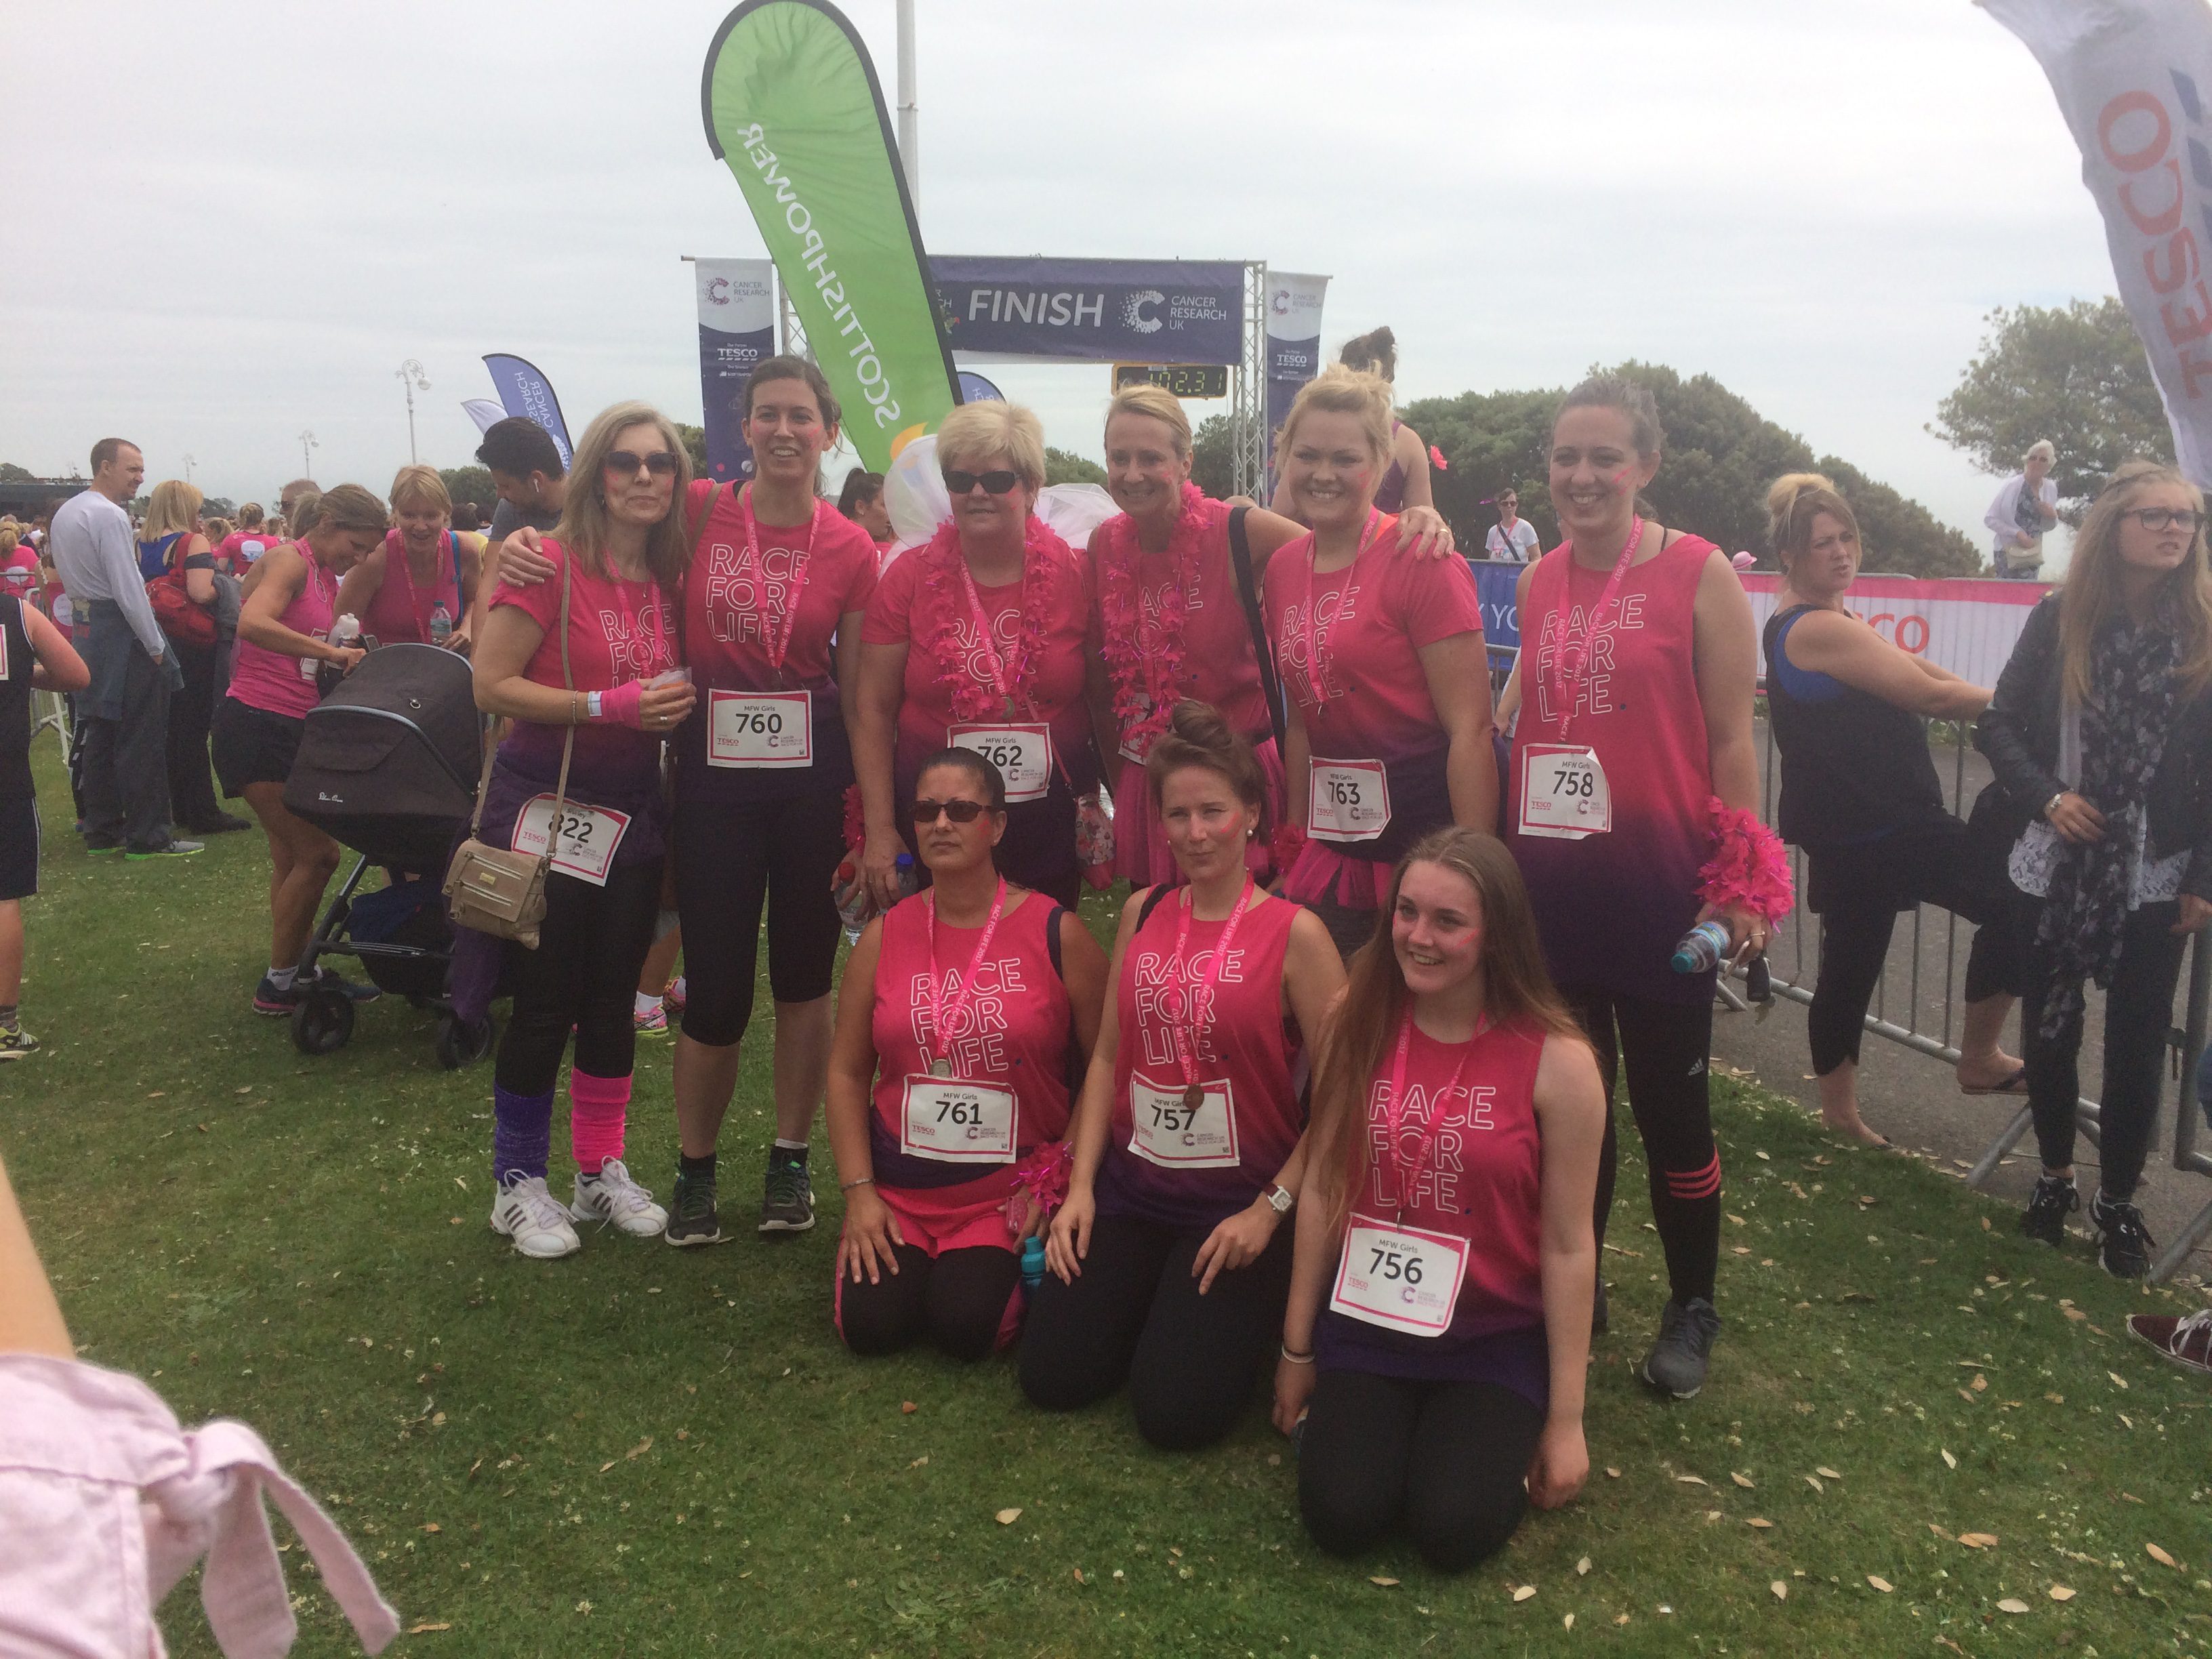 Mammoth effort raising £1500 for Cancer Research